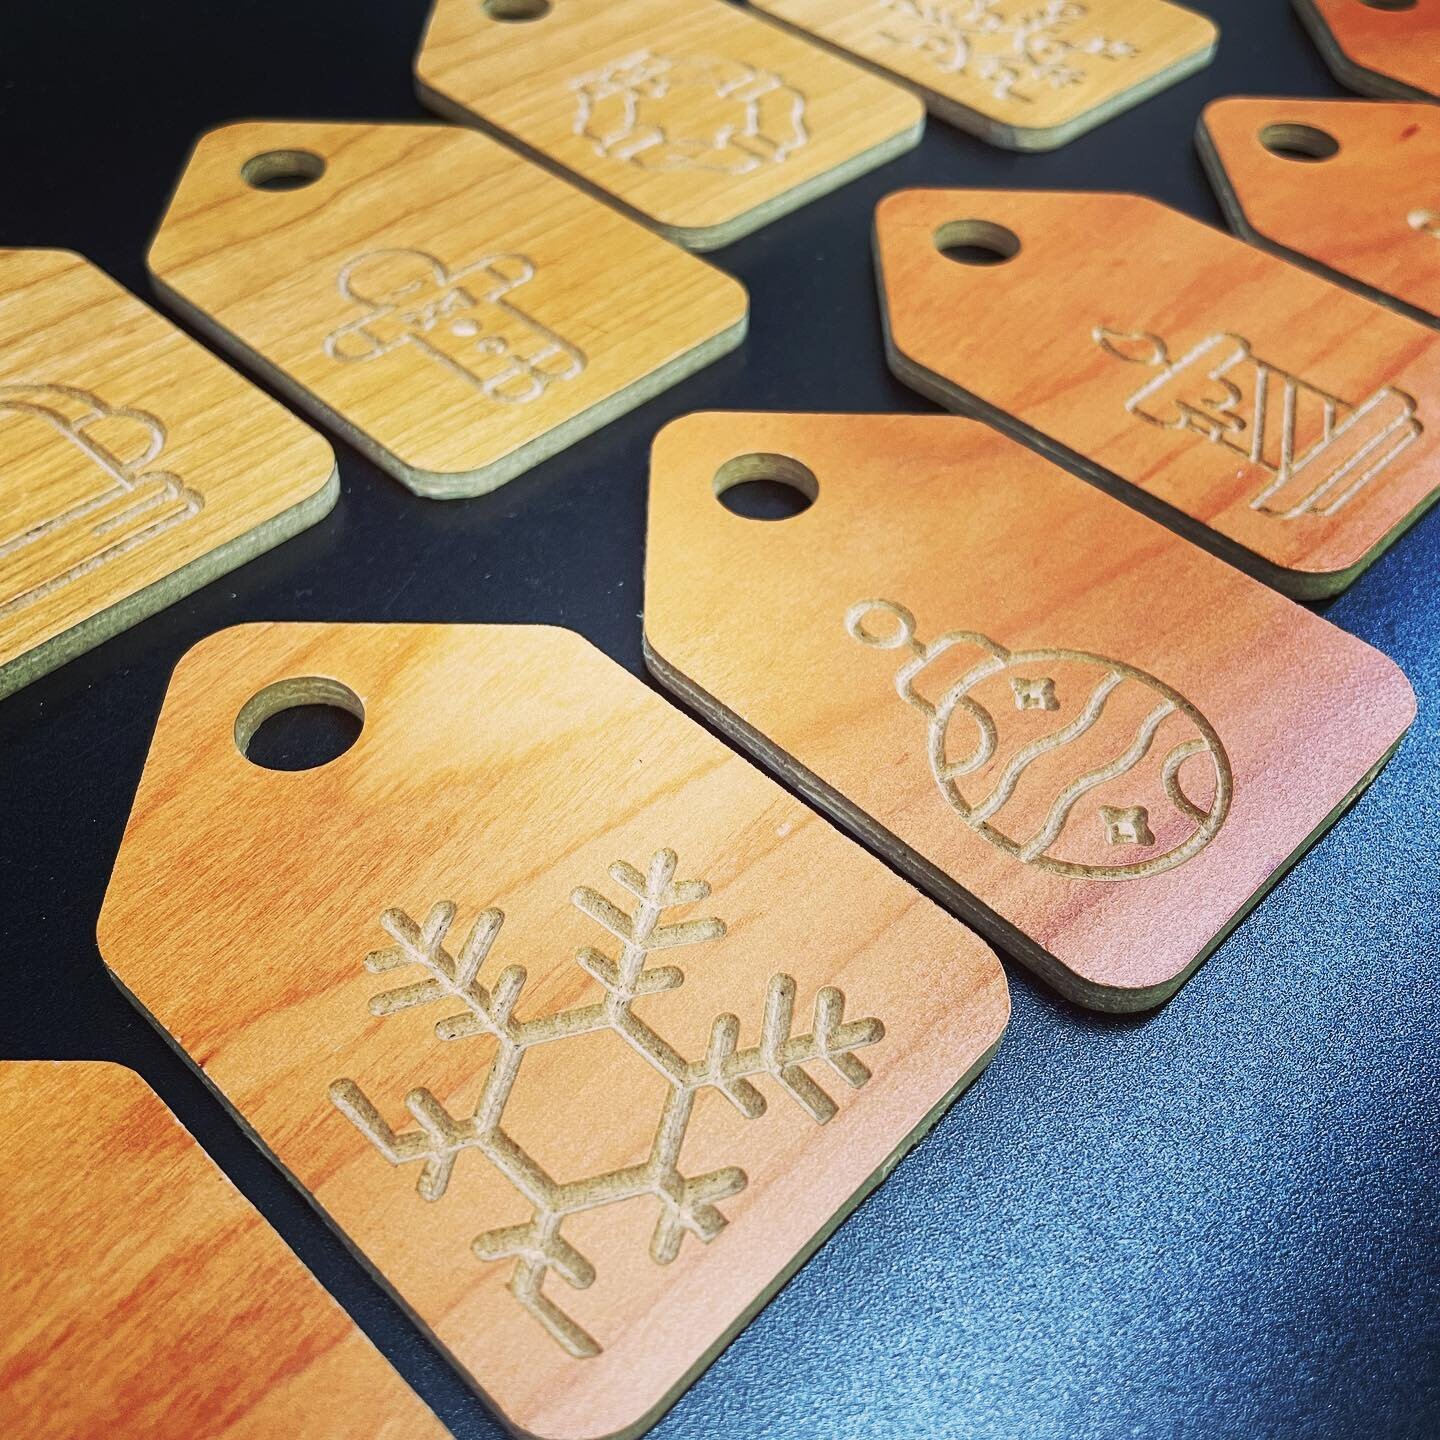 Designed and cut some gift tags out of cherry plywood that can even be used as ornaments for years to come. 🎁🎄&thinsp;
&thinsp;
#giftwrapping #gifttag #giftlabels #cnc #adobeillustrator #design #woodshop #xmas #christmas #present #plywood #ornament